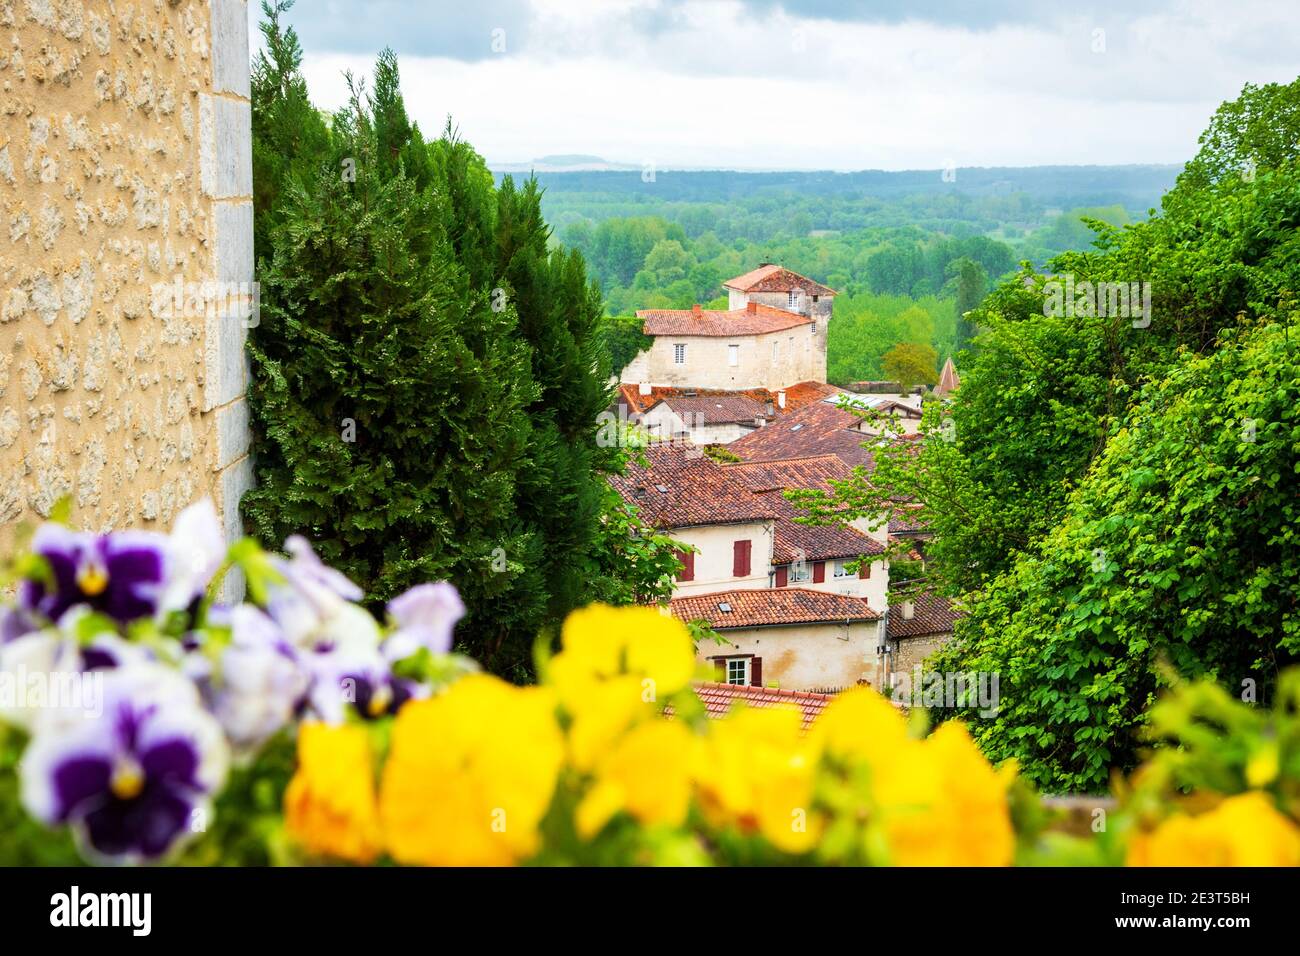 Aubeterre sur Dronne (France). Listed as 'One of the most beautiful villages in France' since 1993. Blurry pansy flowers at foreground. Stock Photo